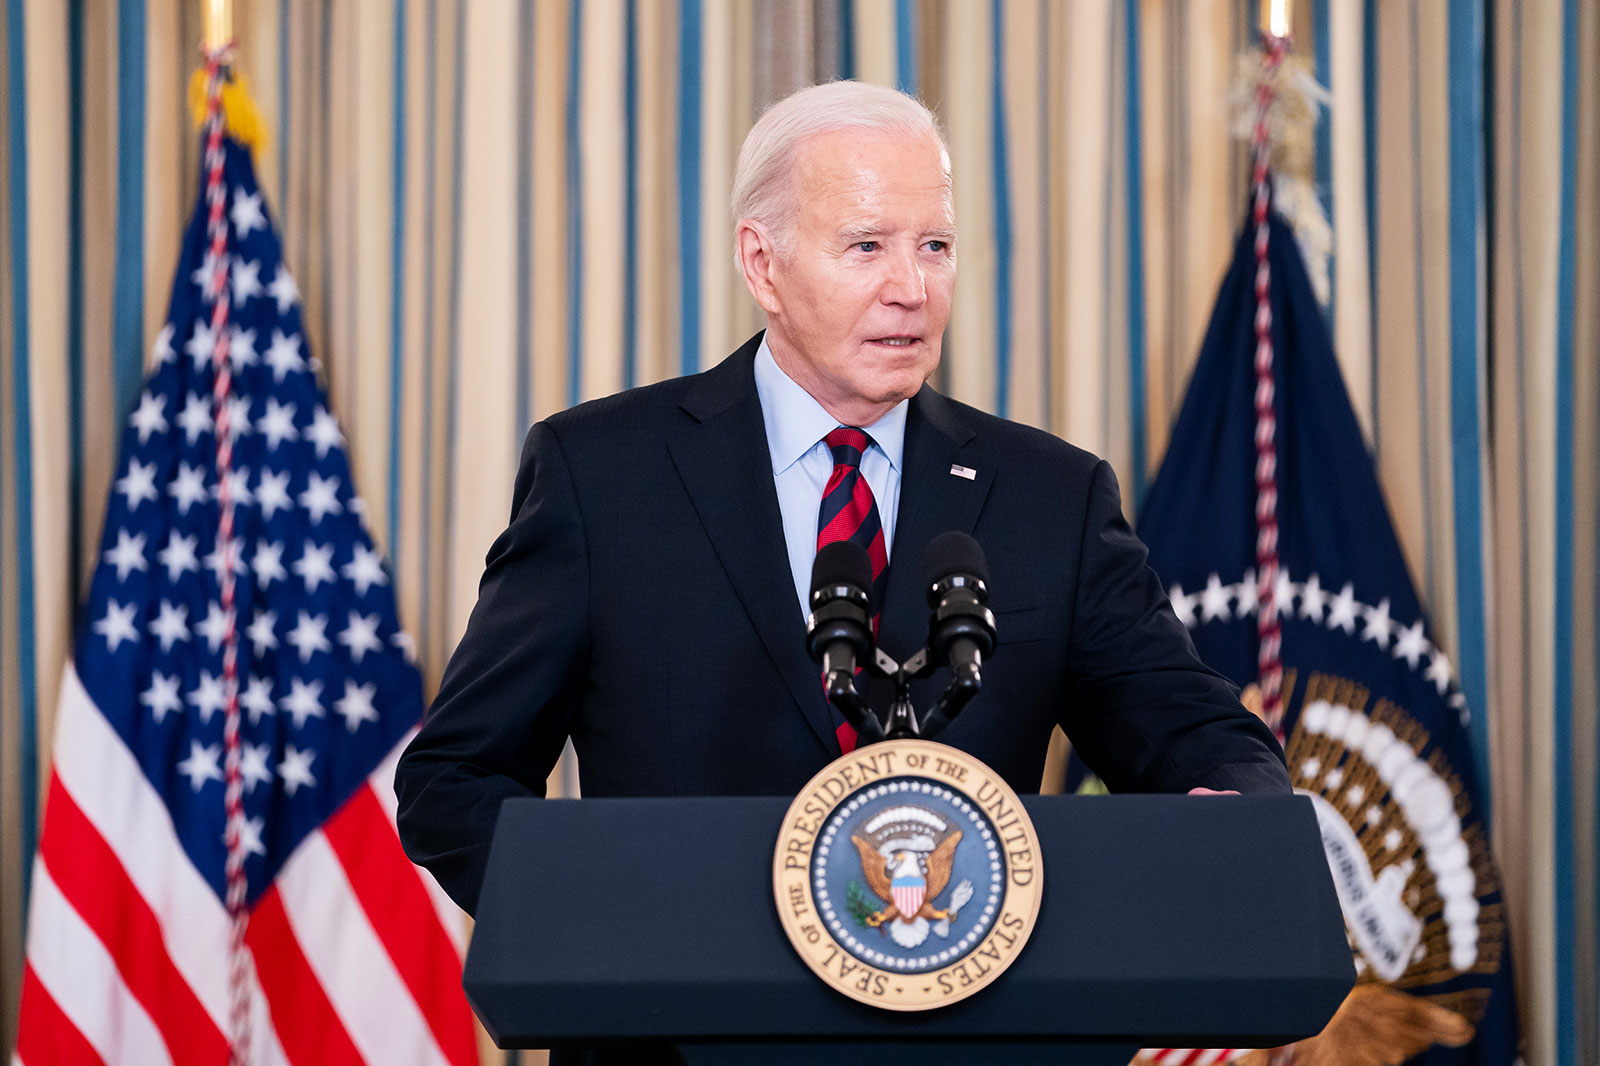 US President Joe Biden speaks during a meeting at the White House on March 5 in Washington, DC.